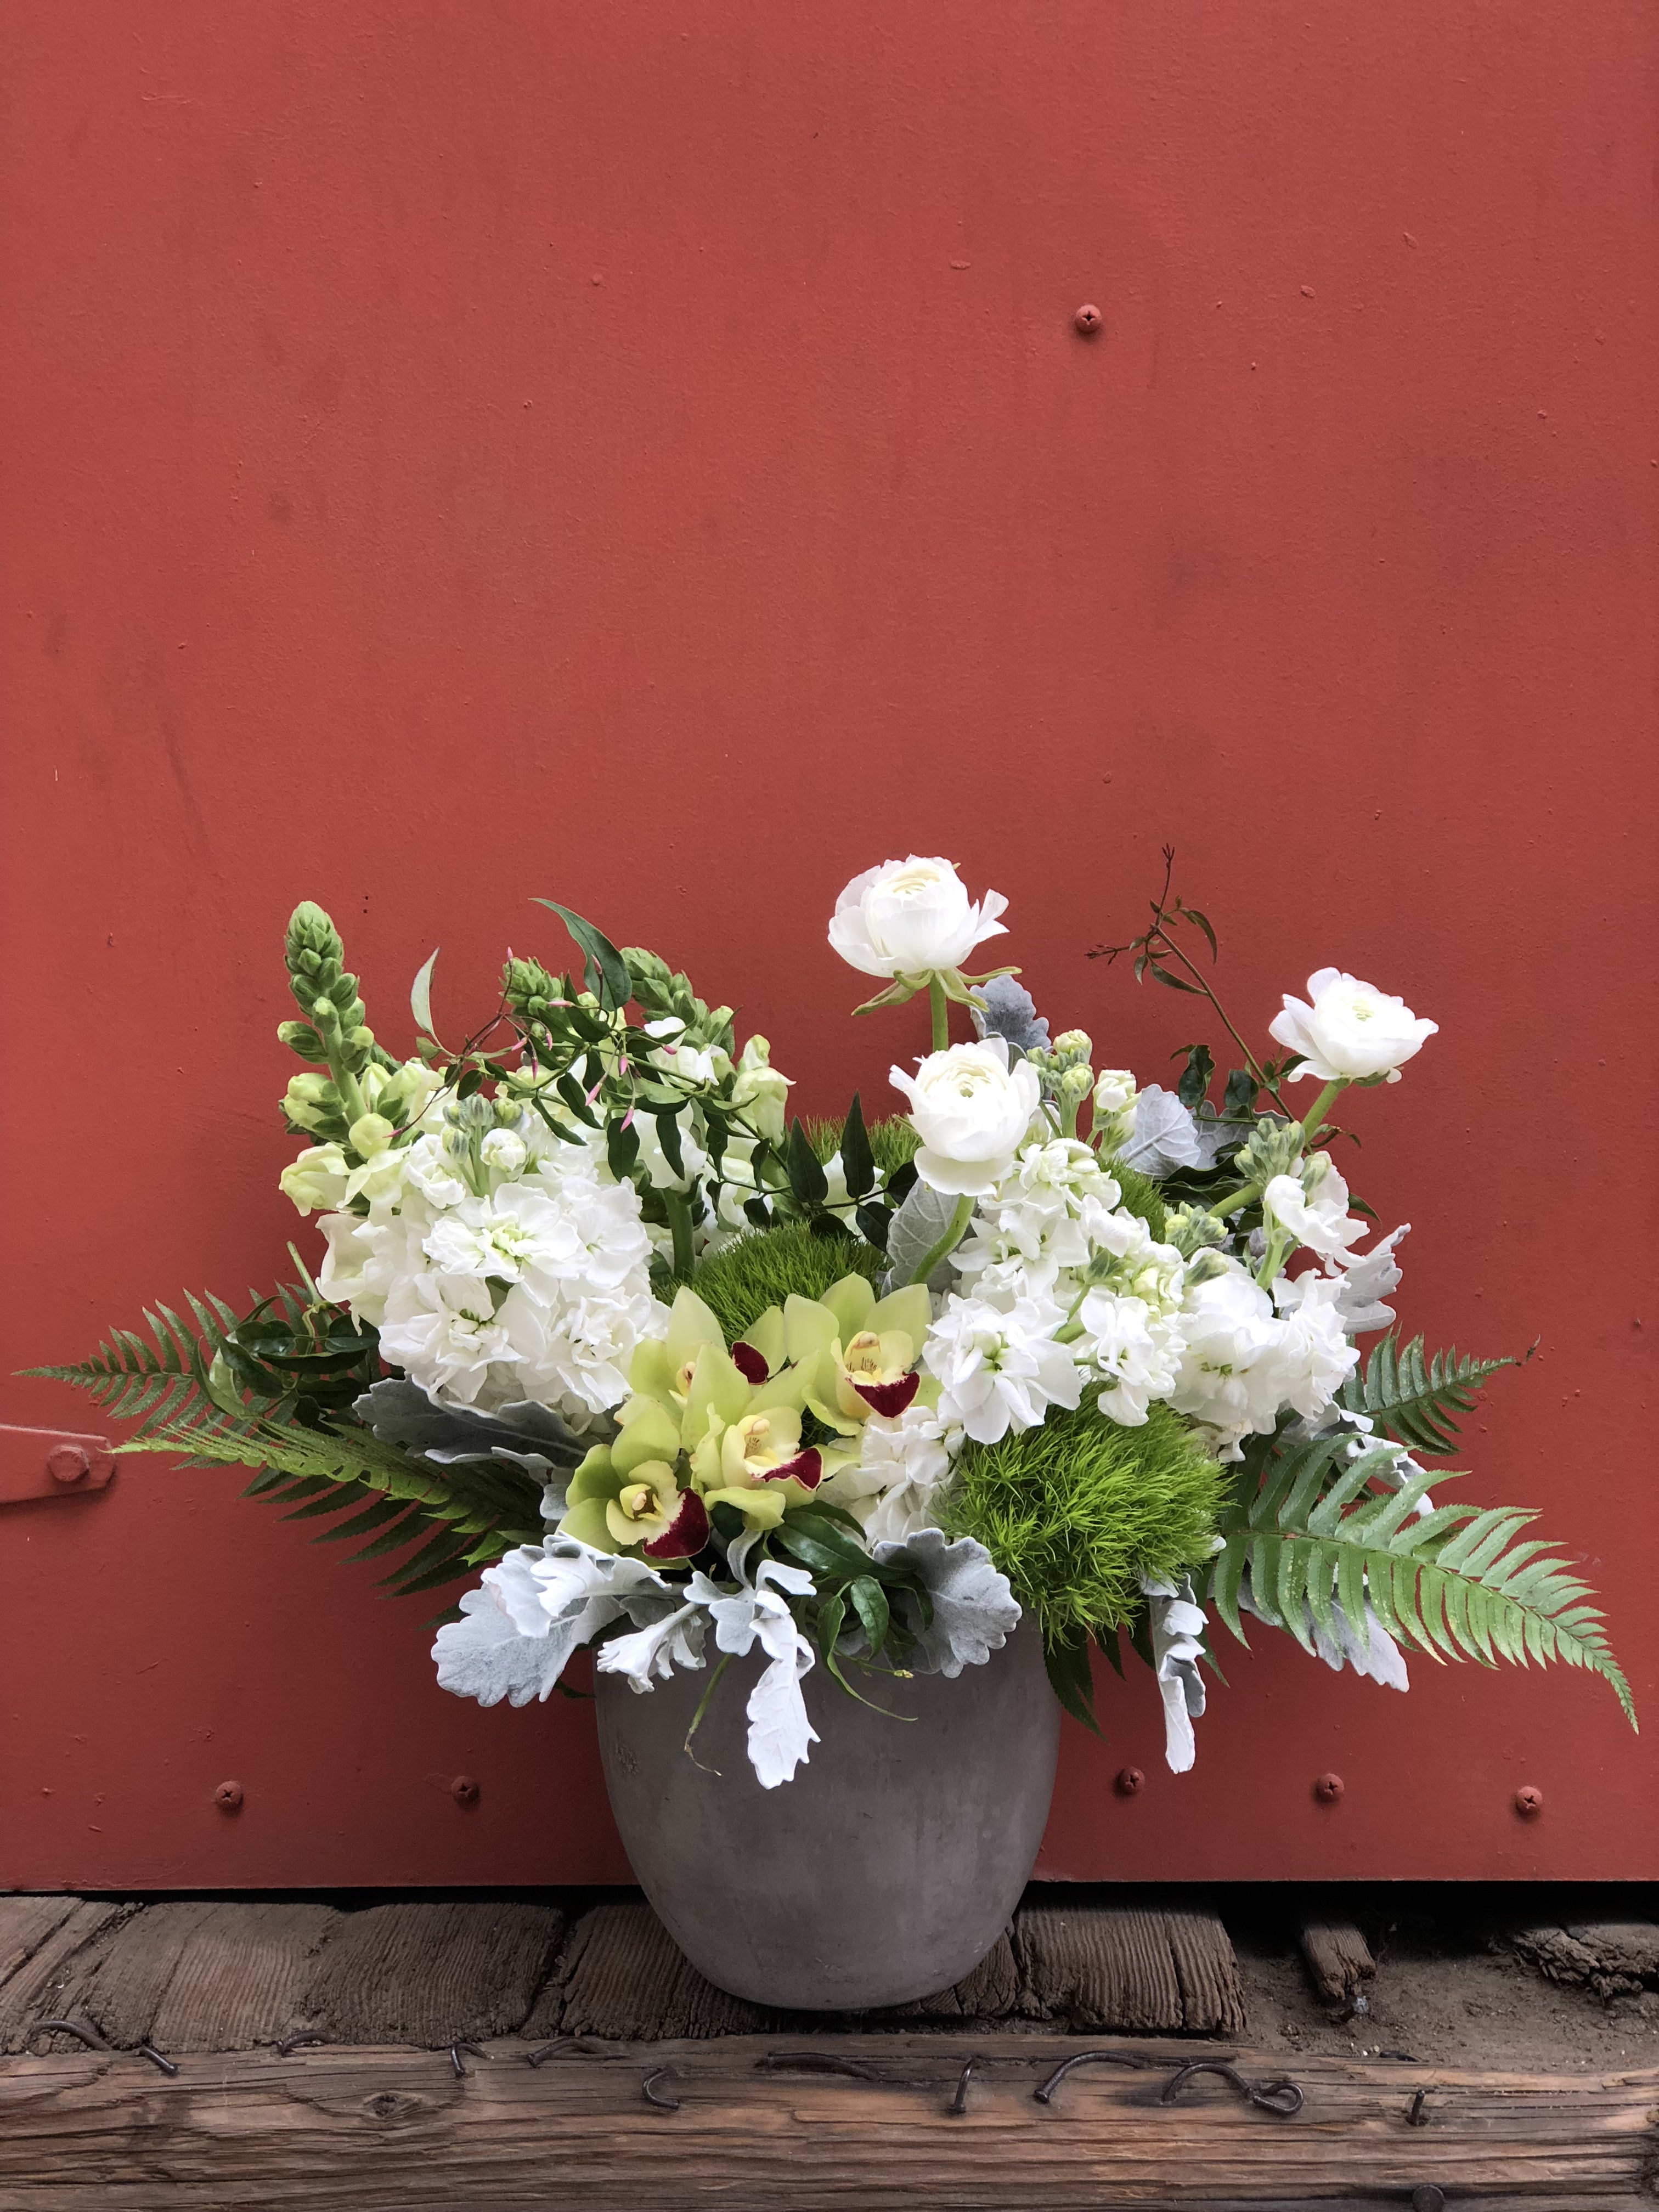 Breath of fresh air - There's nothing like recieving a fresh floral arrangement that makes you pause and enjoy nature's beauty.  This arrangement was made with that very idea in mind.  Take a deep breath, exhale and enjoy this lovely bunch of fragrant stocks, snap dragons, ranunculus, ferns and orchids designed in a concrete style container.  